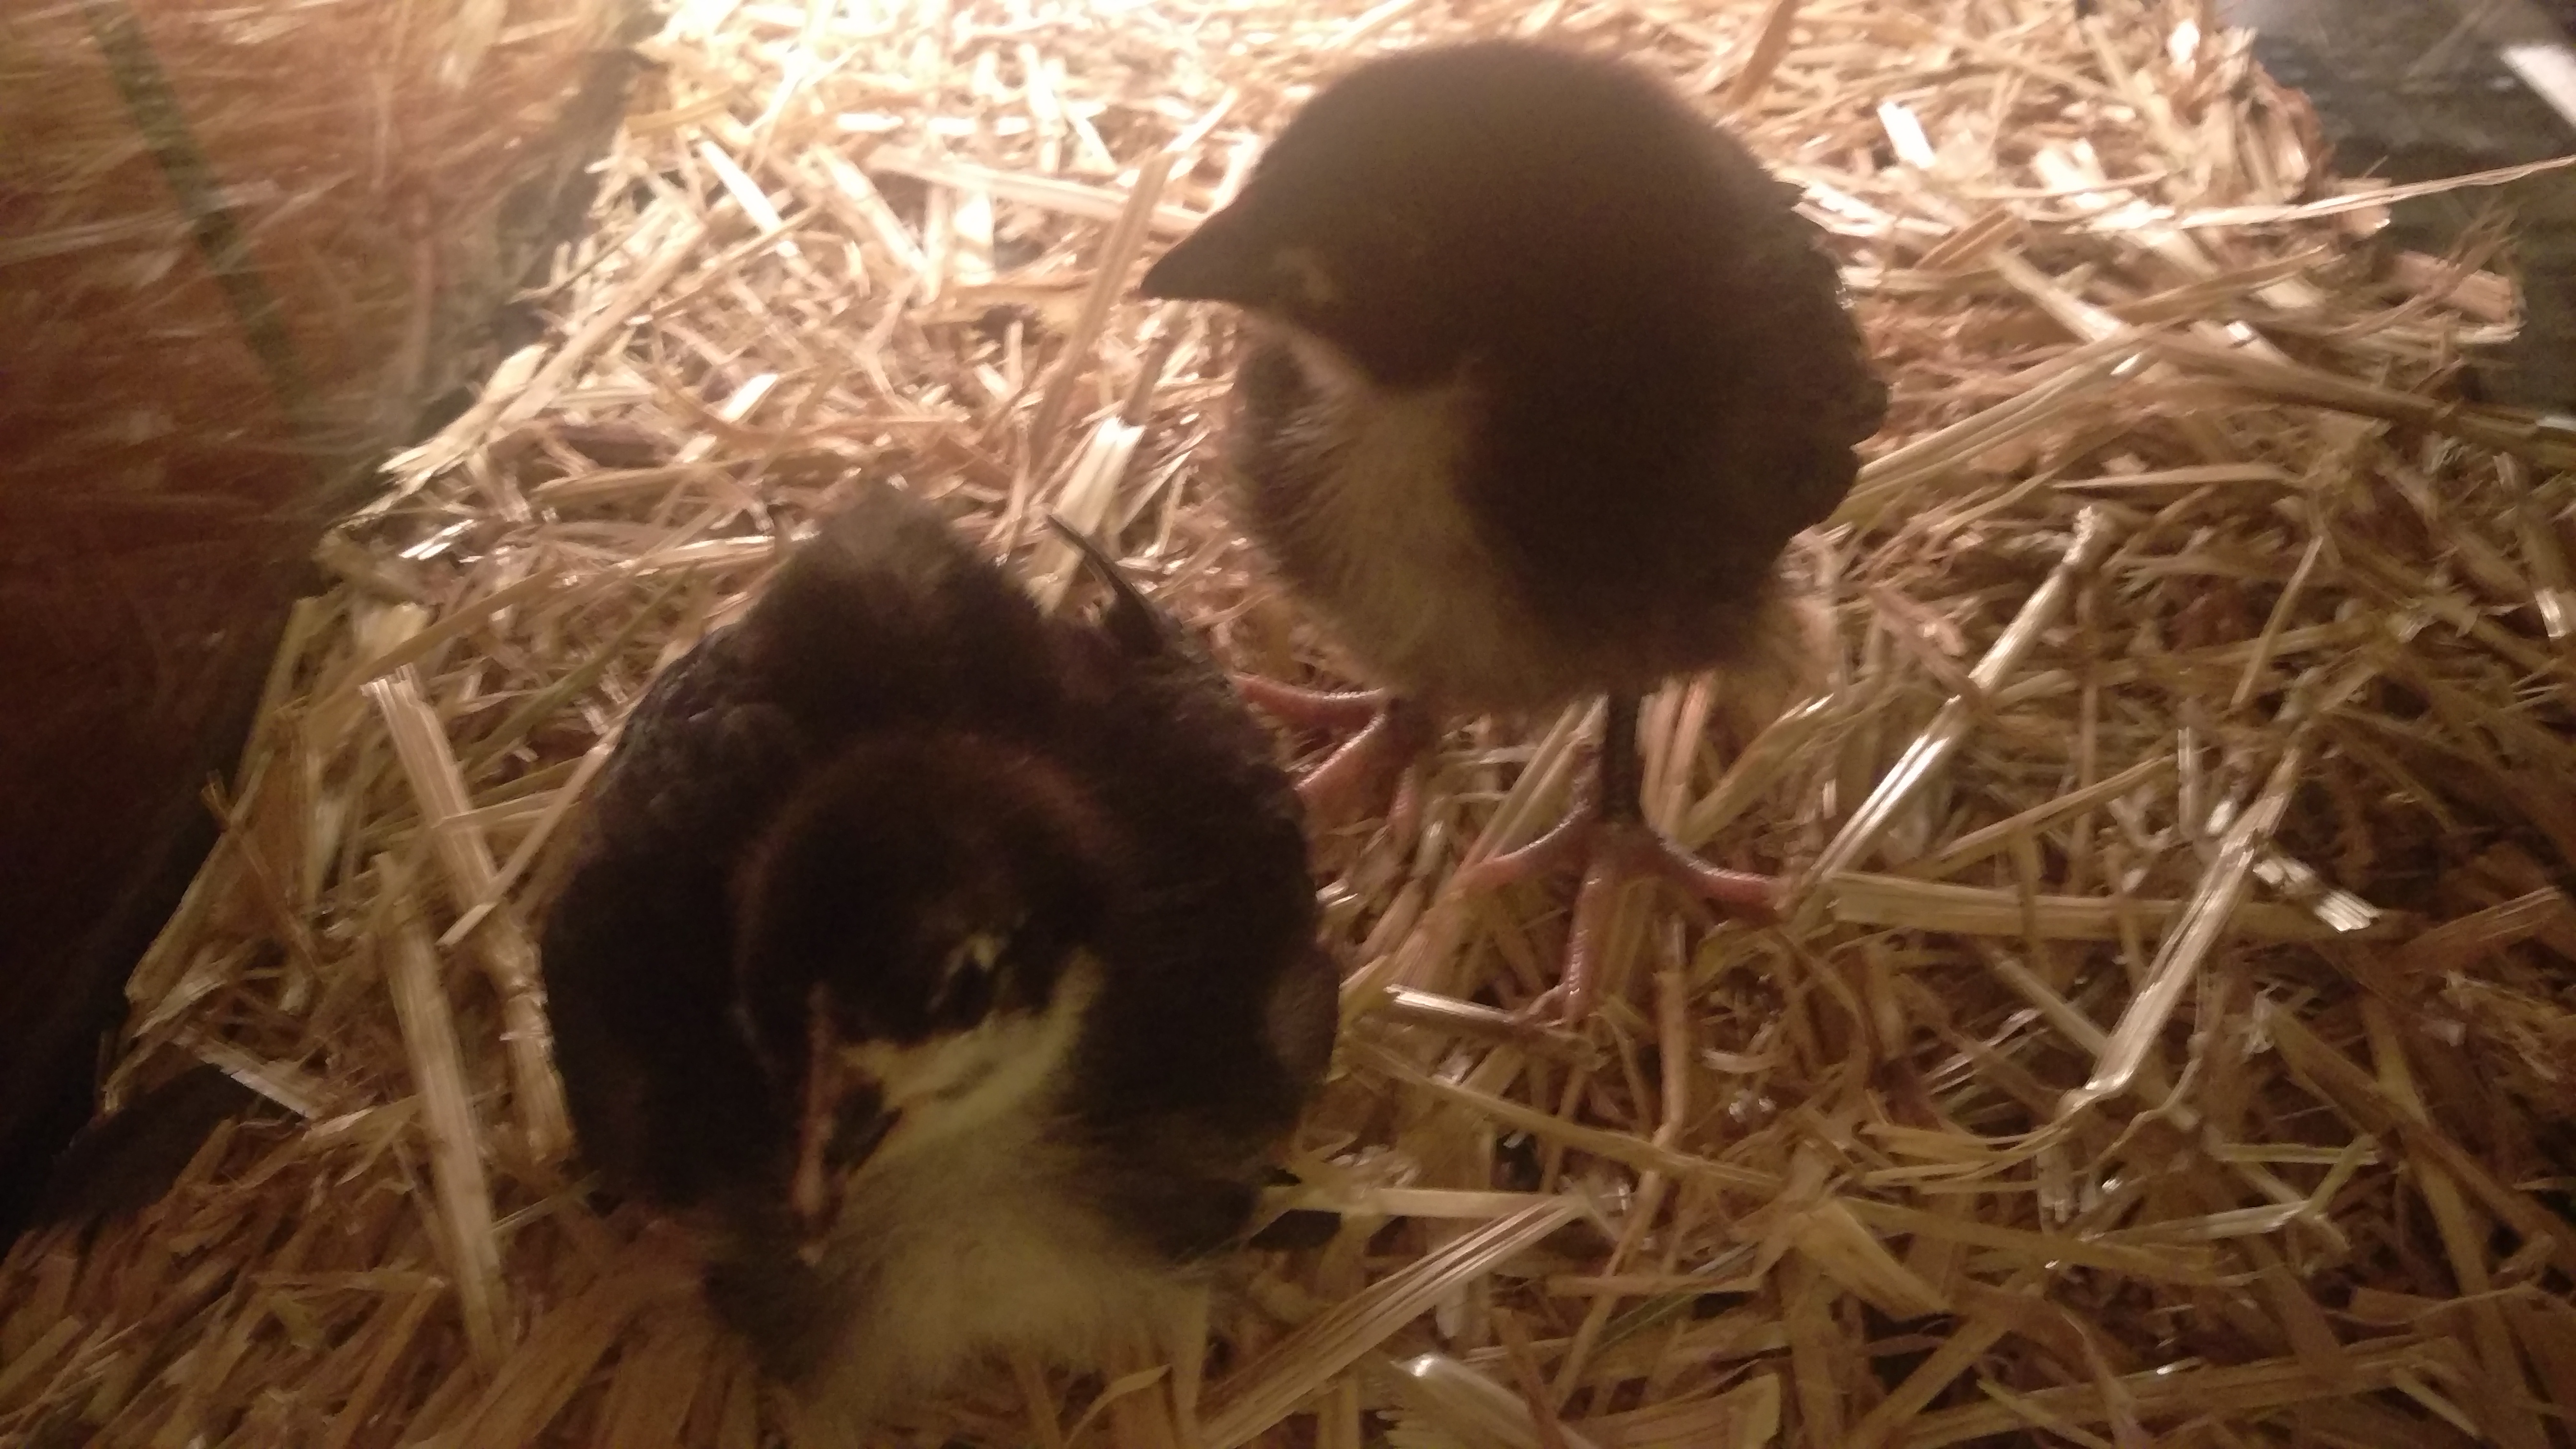 Our newest babies! Doodles and Darkheart, Black Australorps!